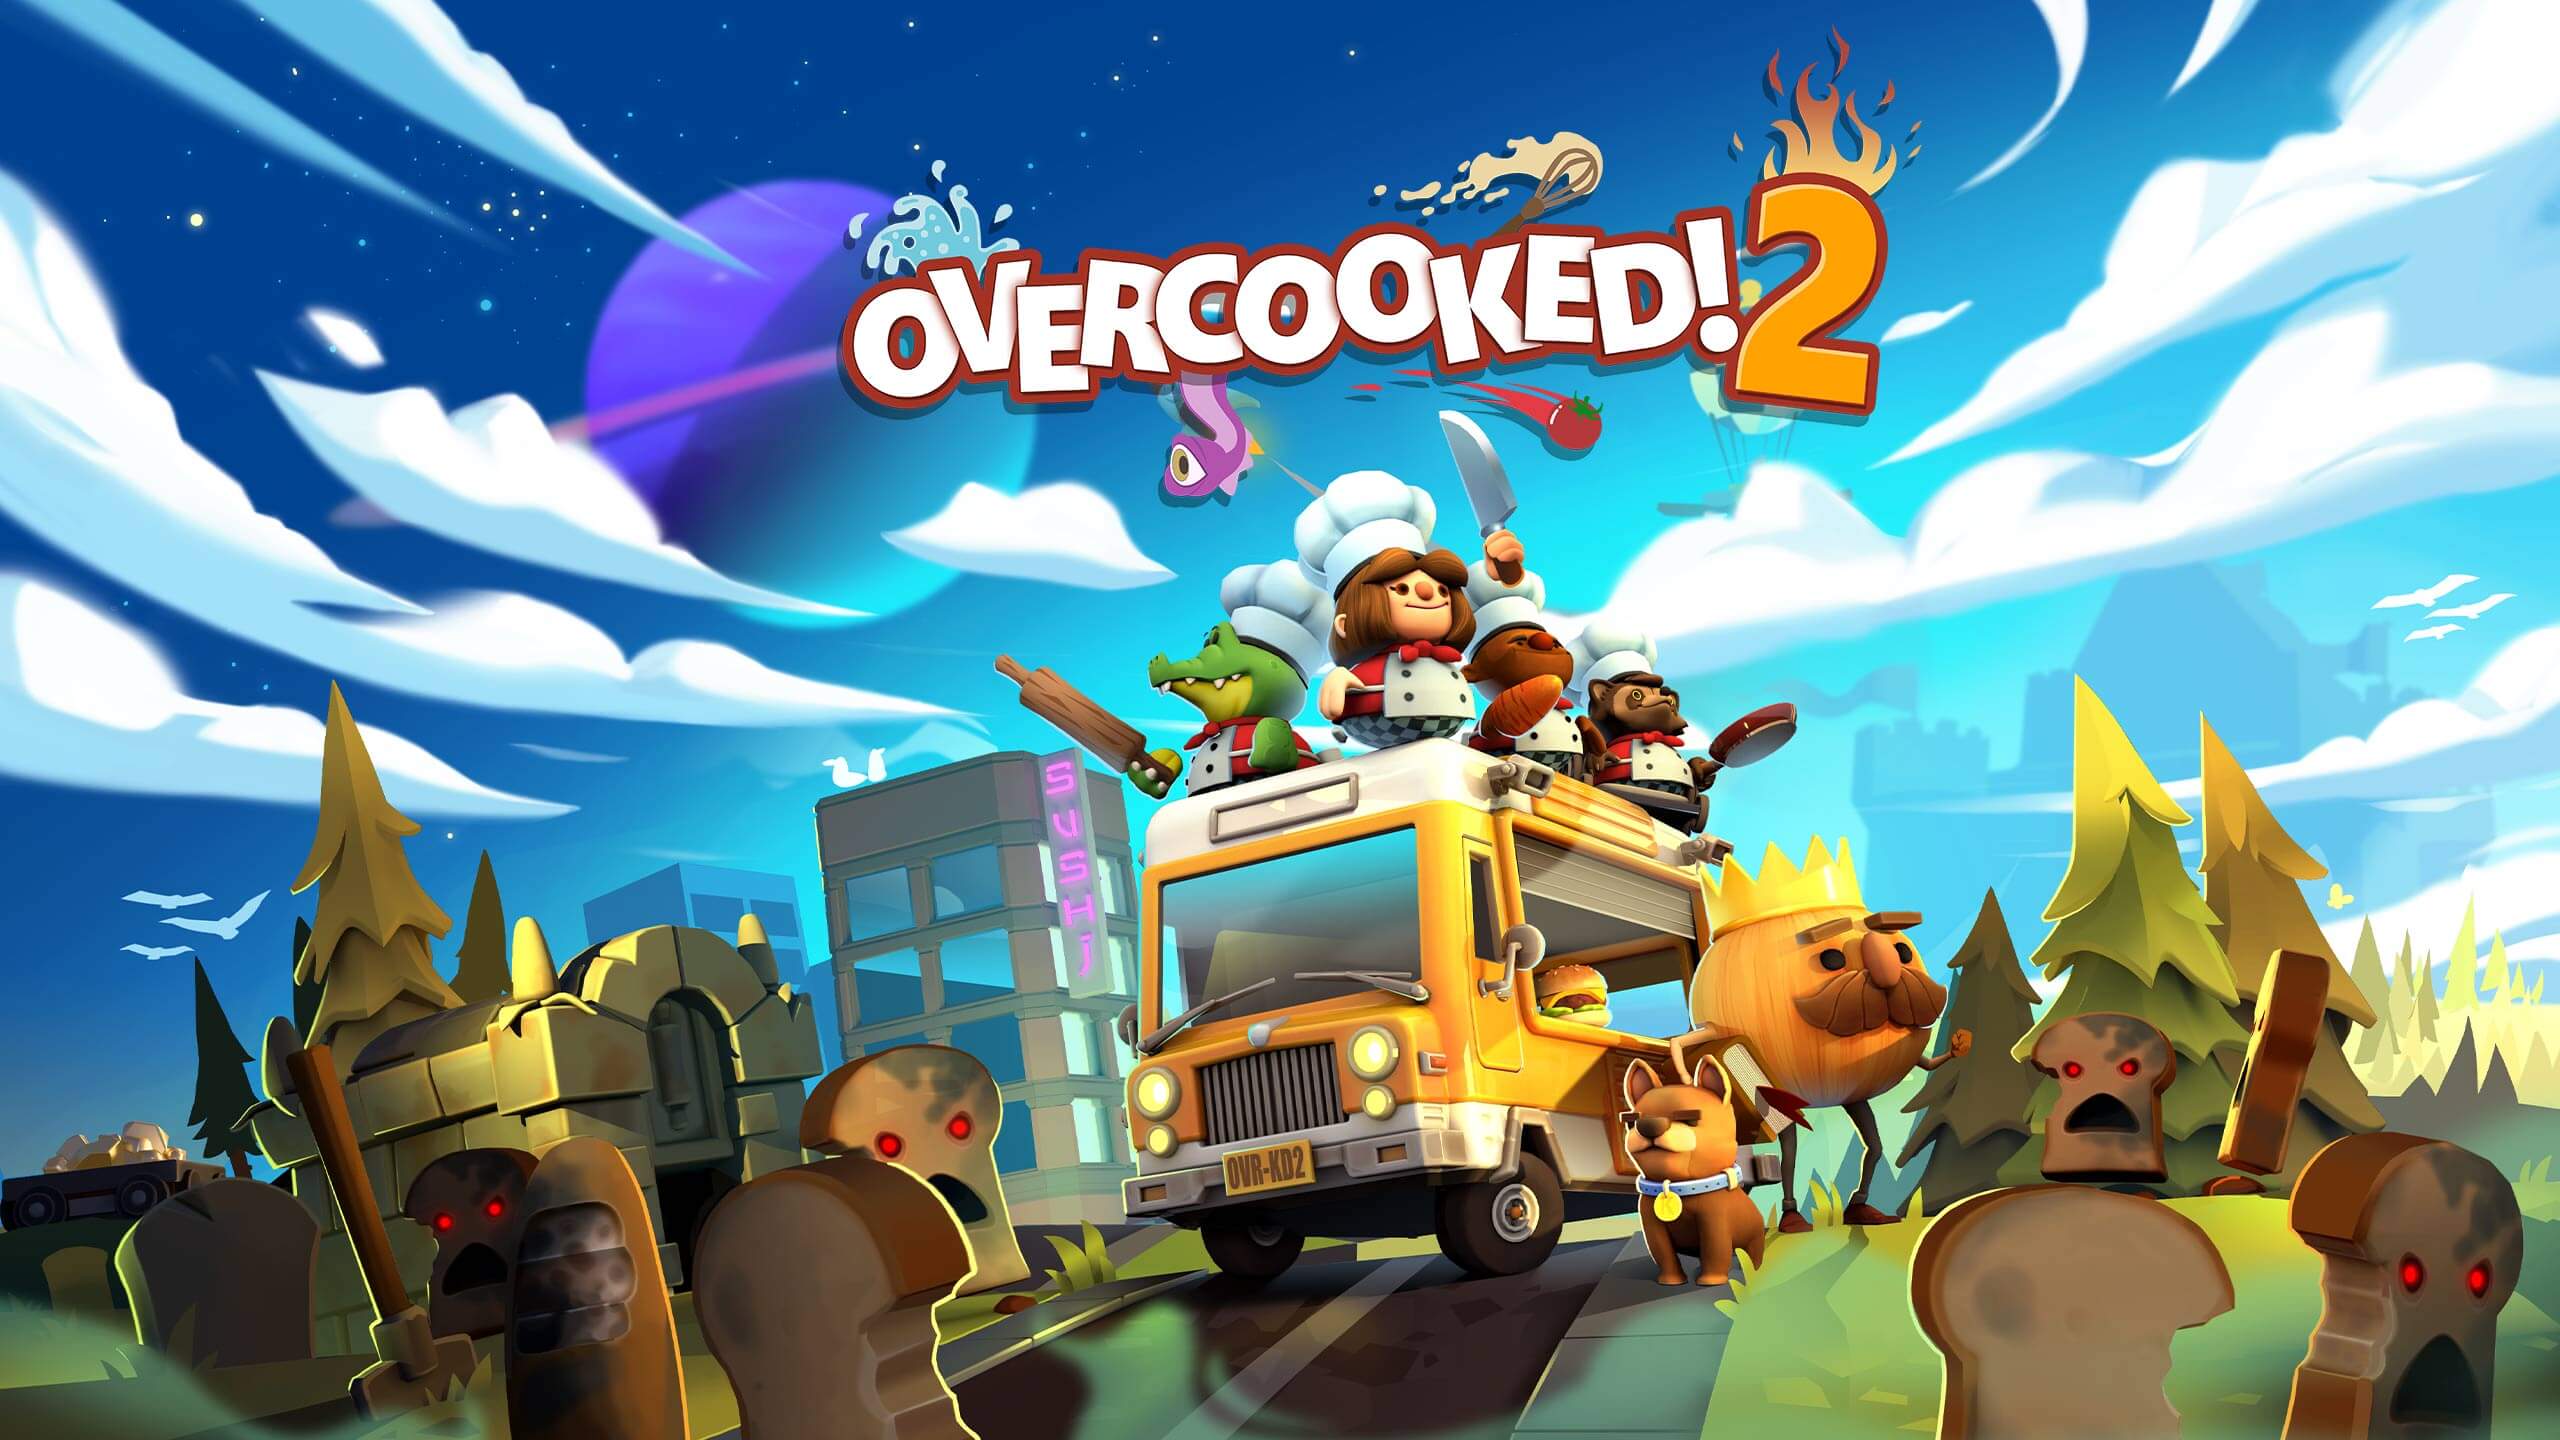 Overcooked 2 grátis na Epic Games Store